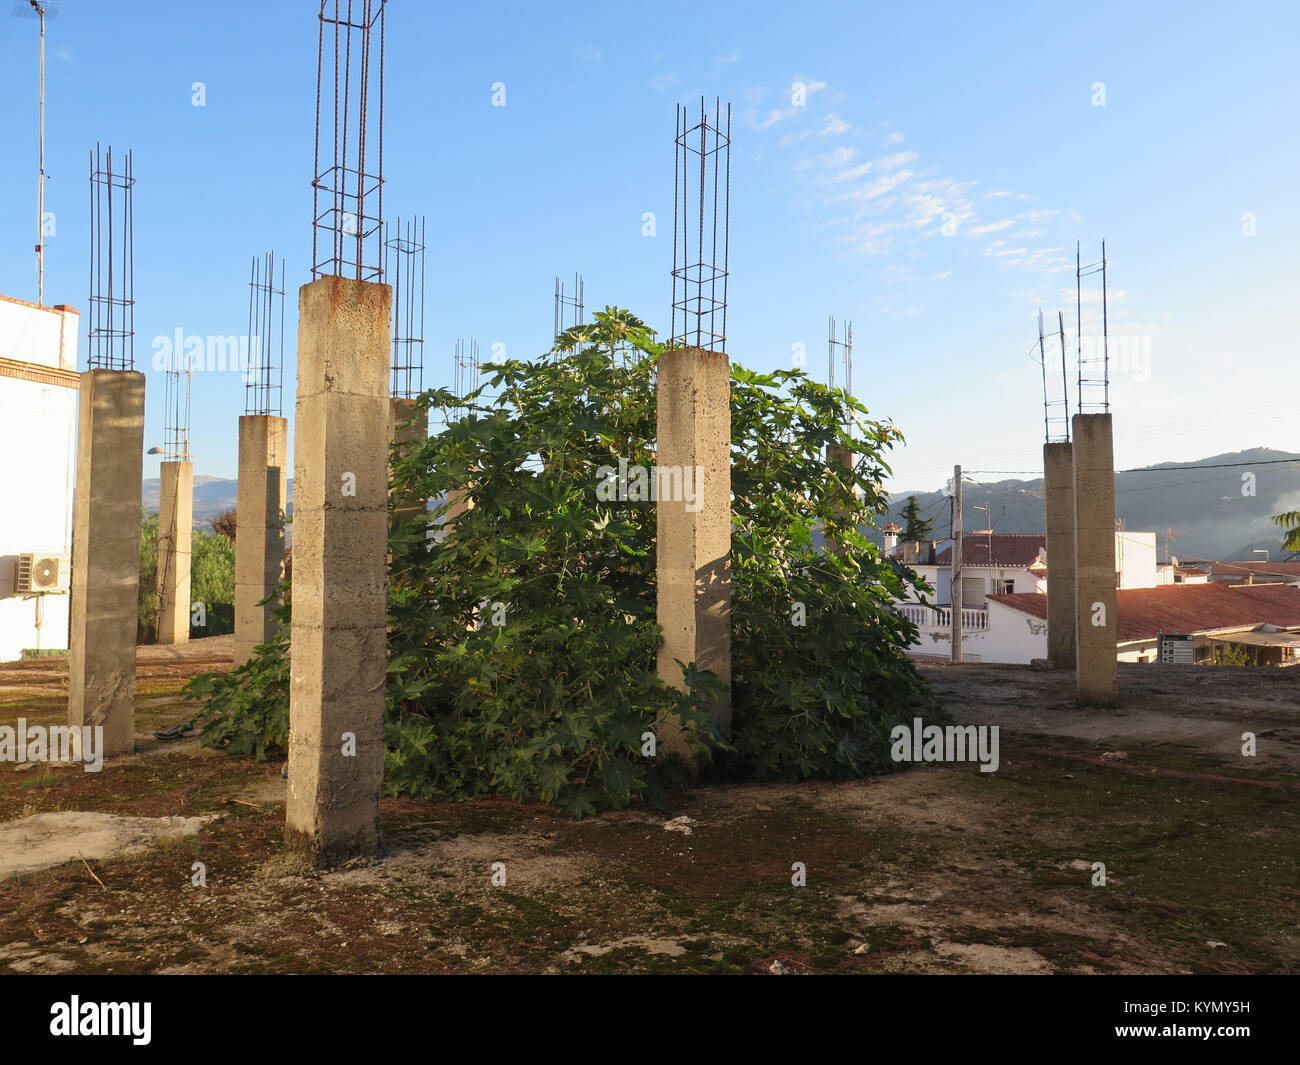 Abandoned building site with tall Reinforced concrete pillars and Fig tree growing through floor Stock Photo